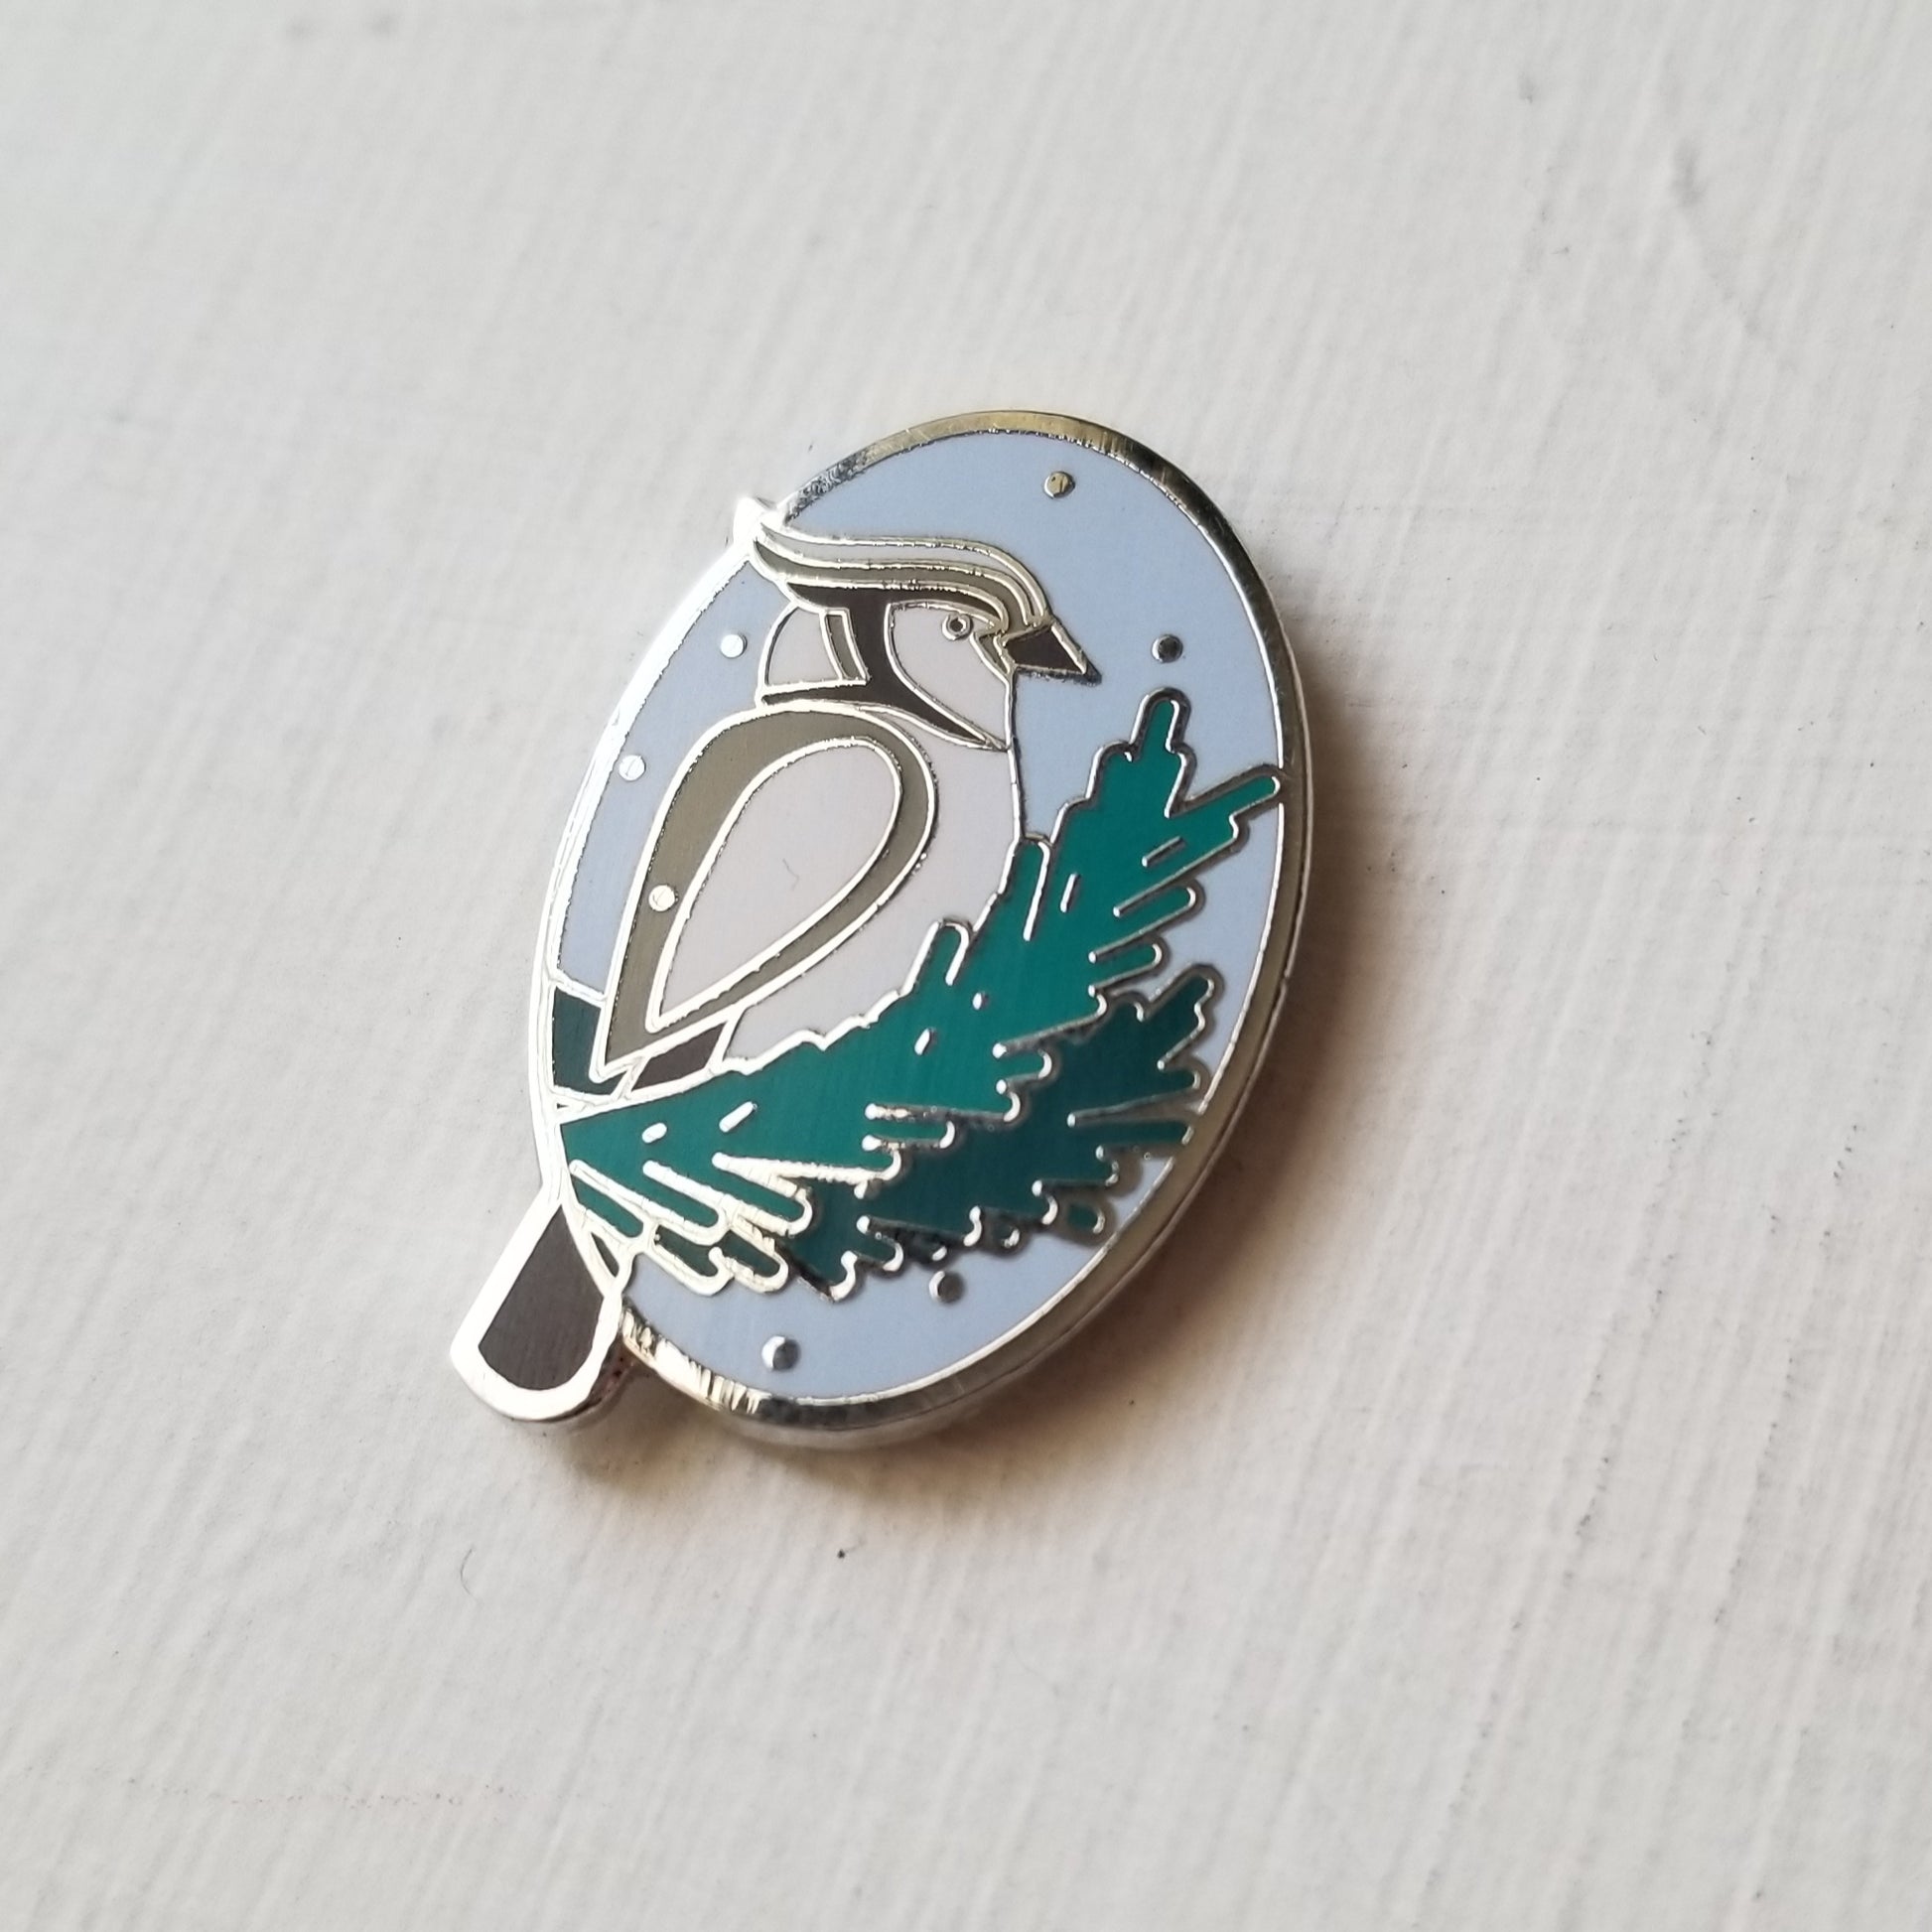 Needle Minder Enamel Bird Magnetic Holder by Stitched tories, 1.25 in,  Silver Plating – Stitched Stories